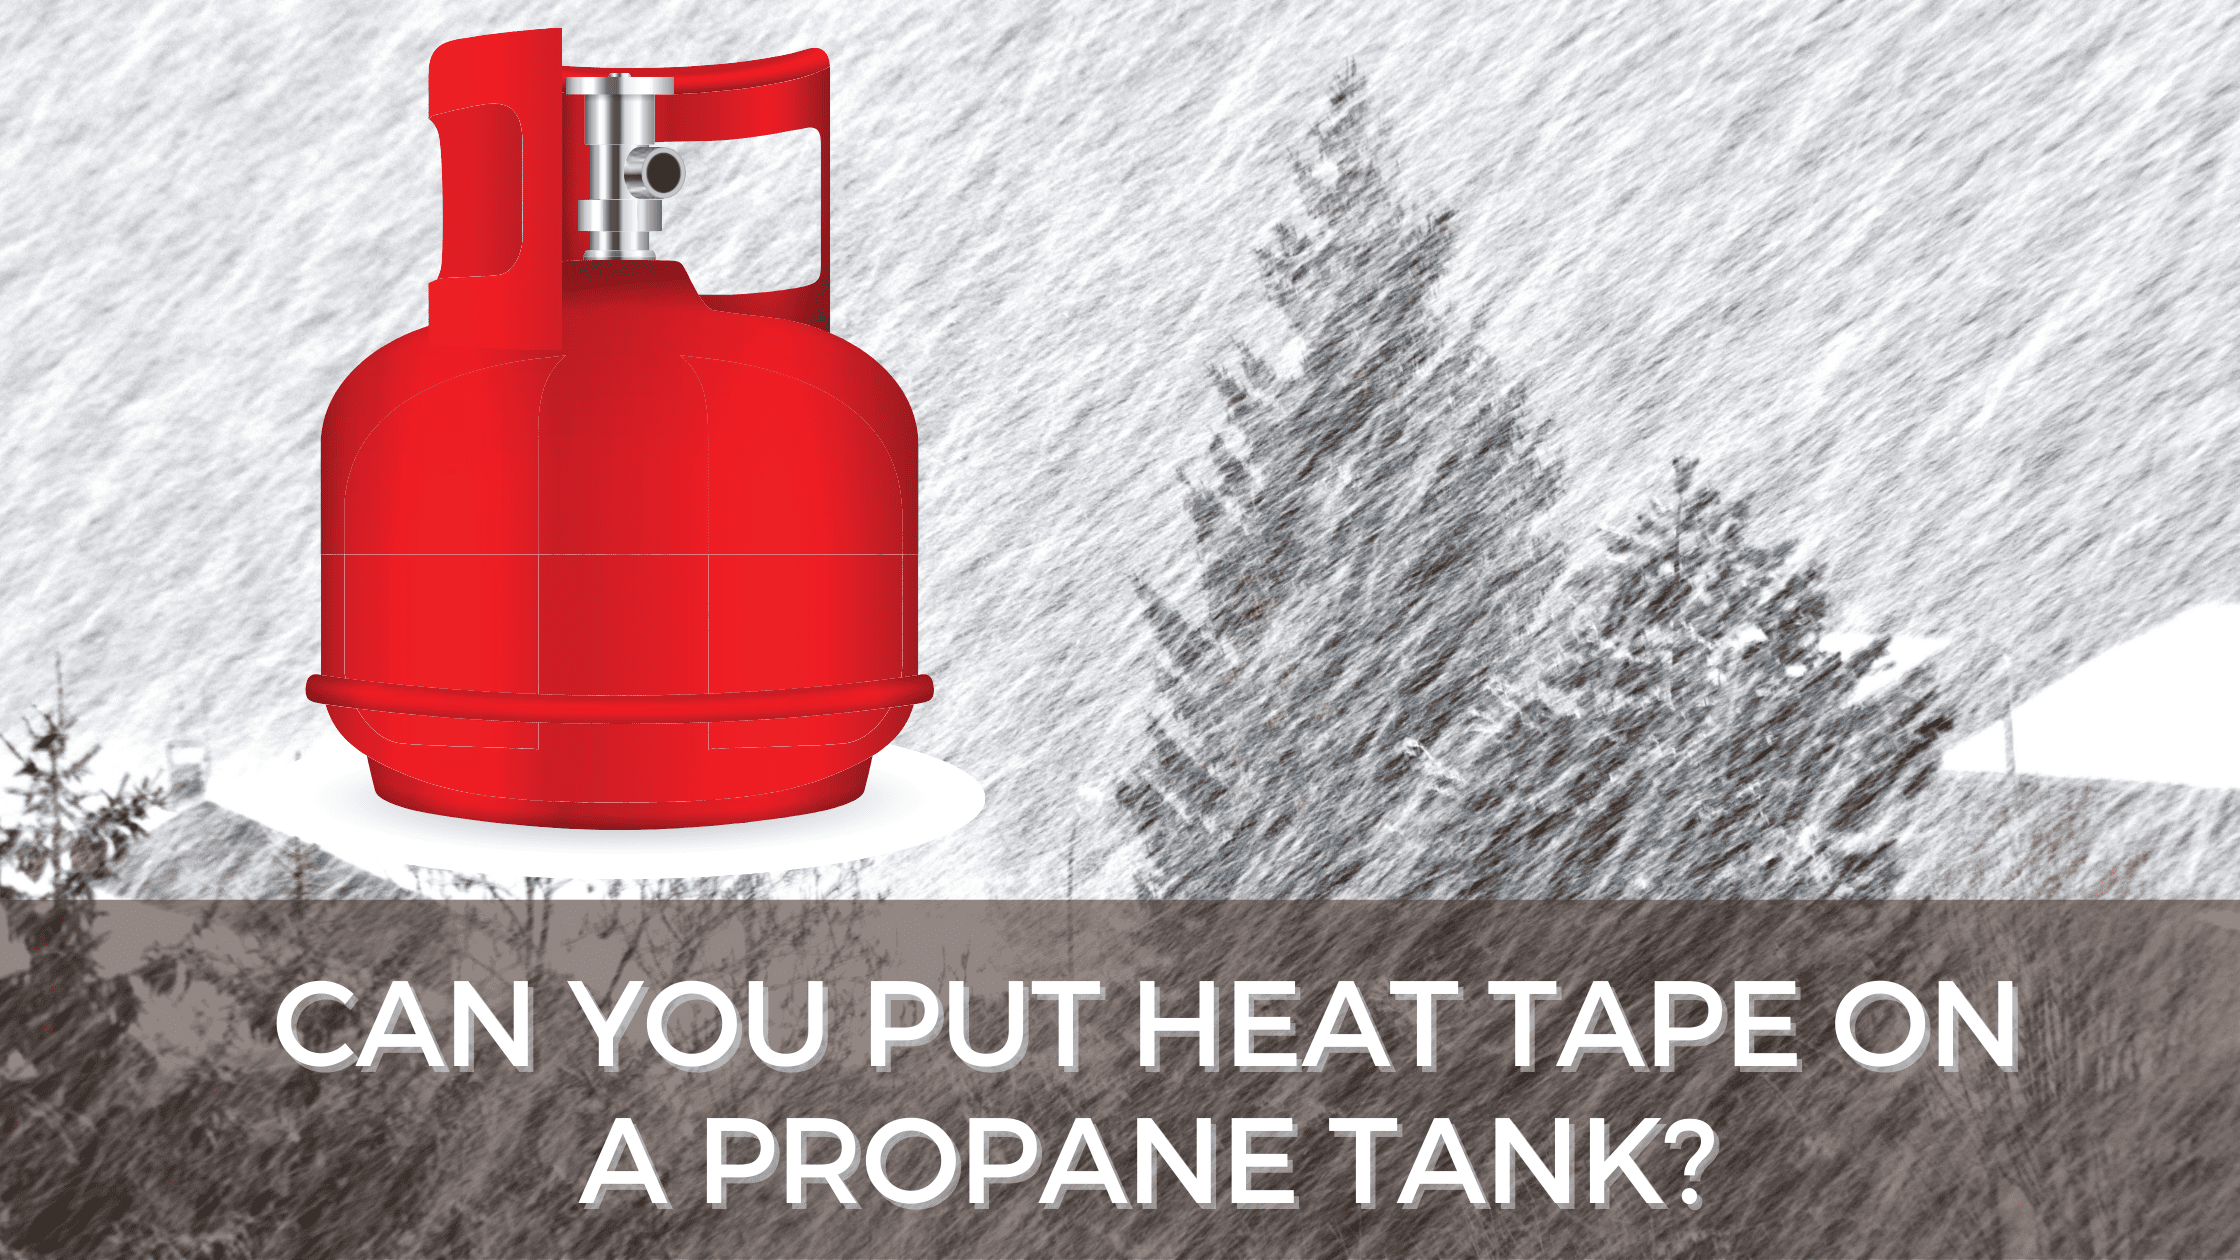 Can You Put Heat Tape on a Propane Tank?